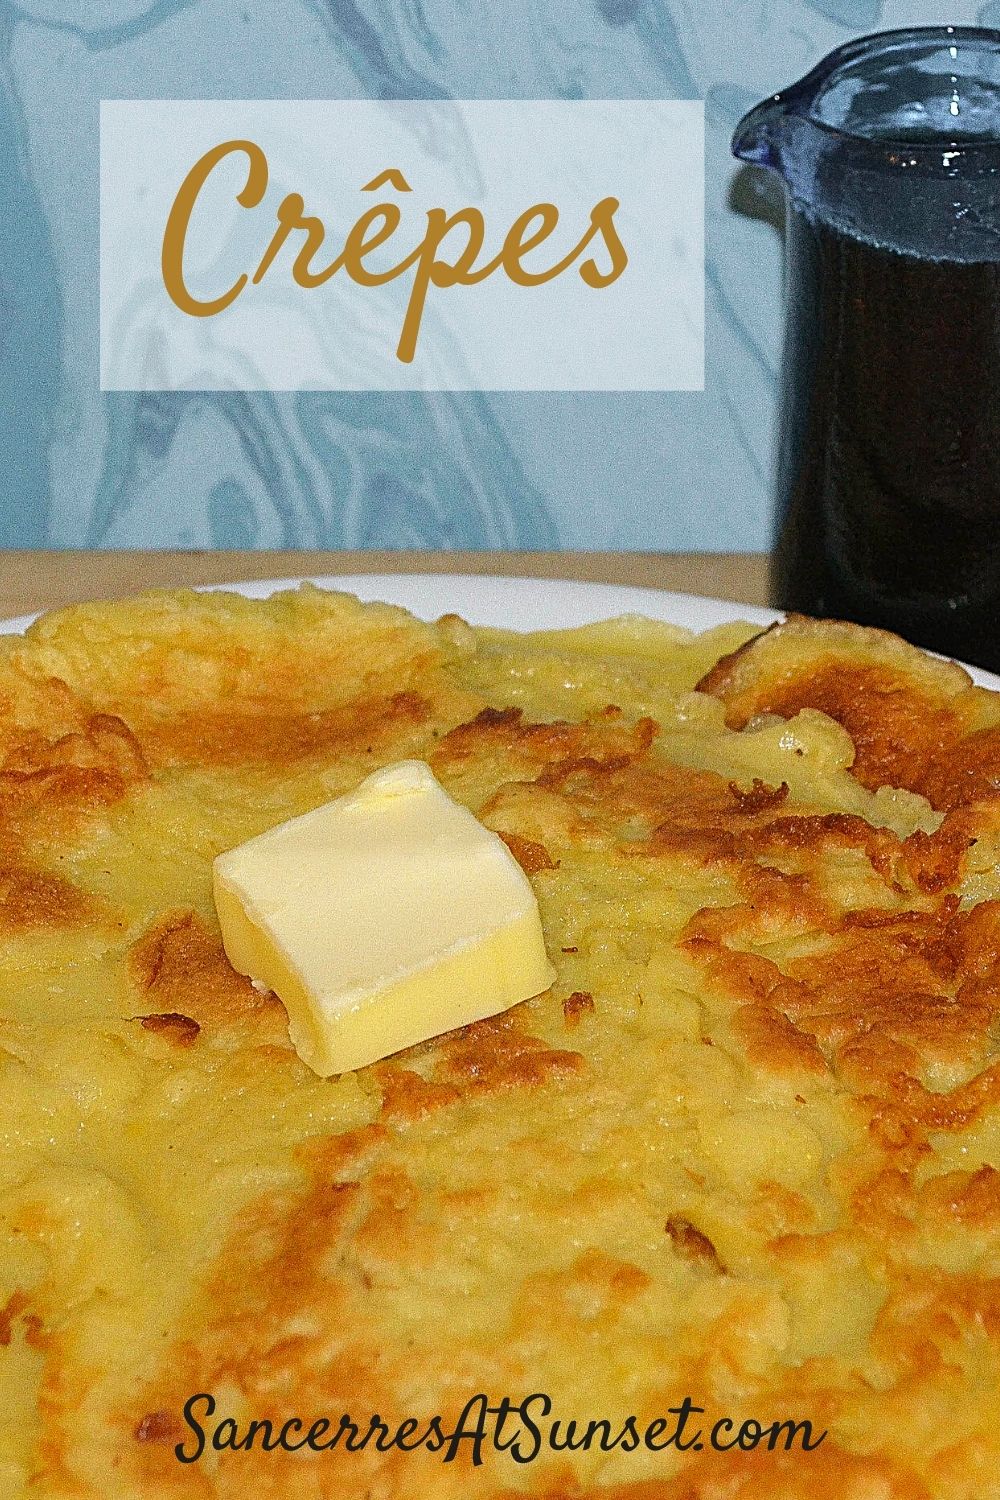 French-Canadian Crêpes